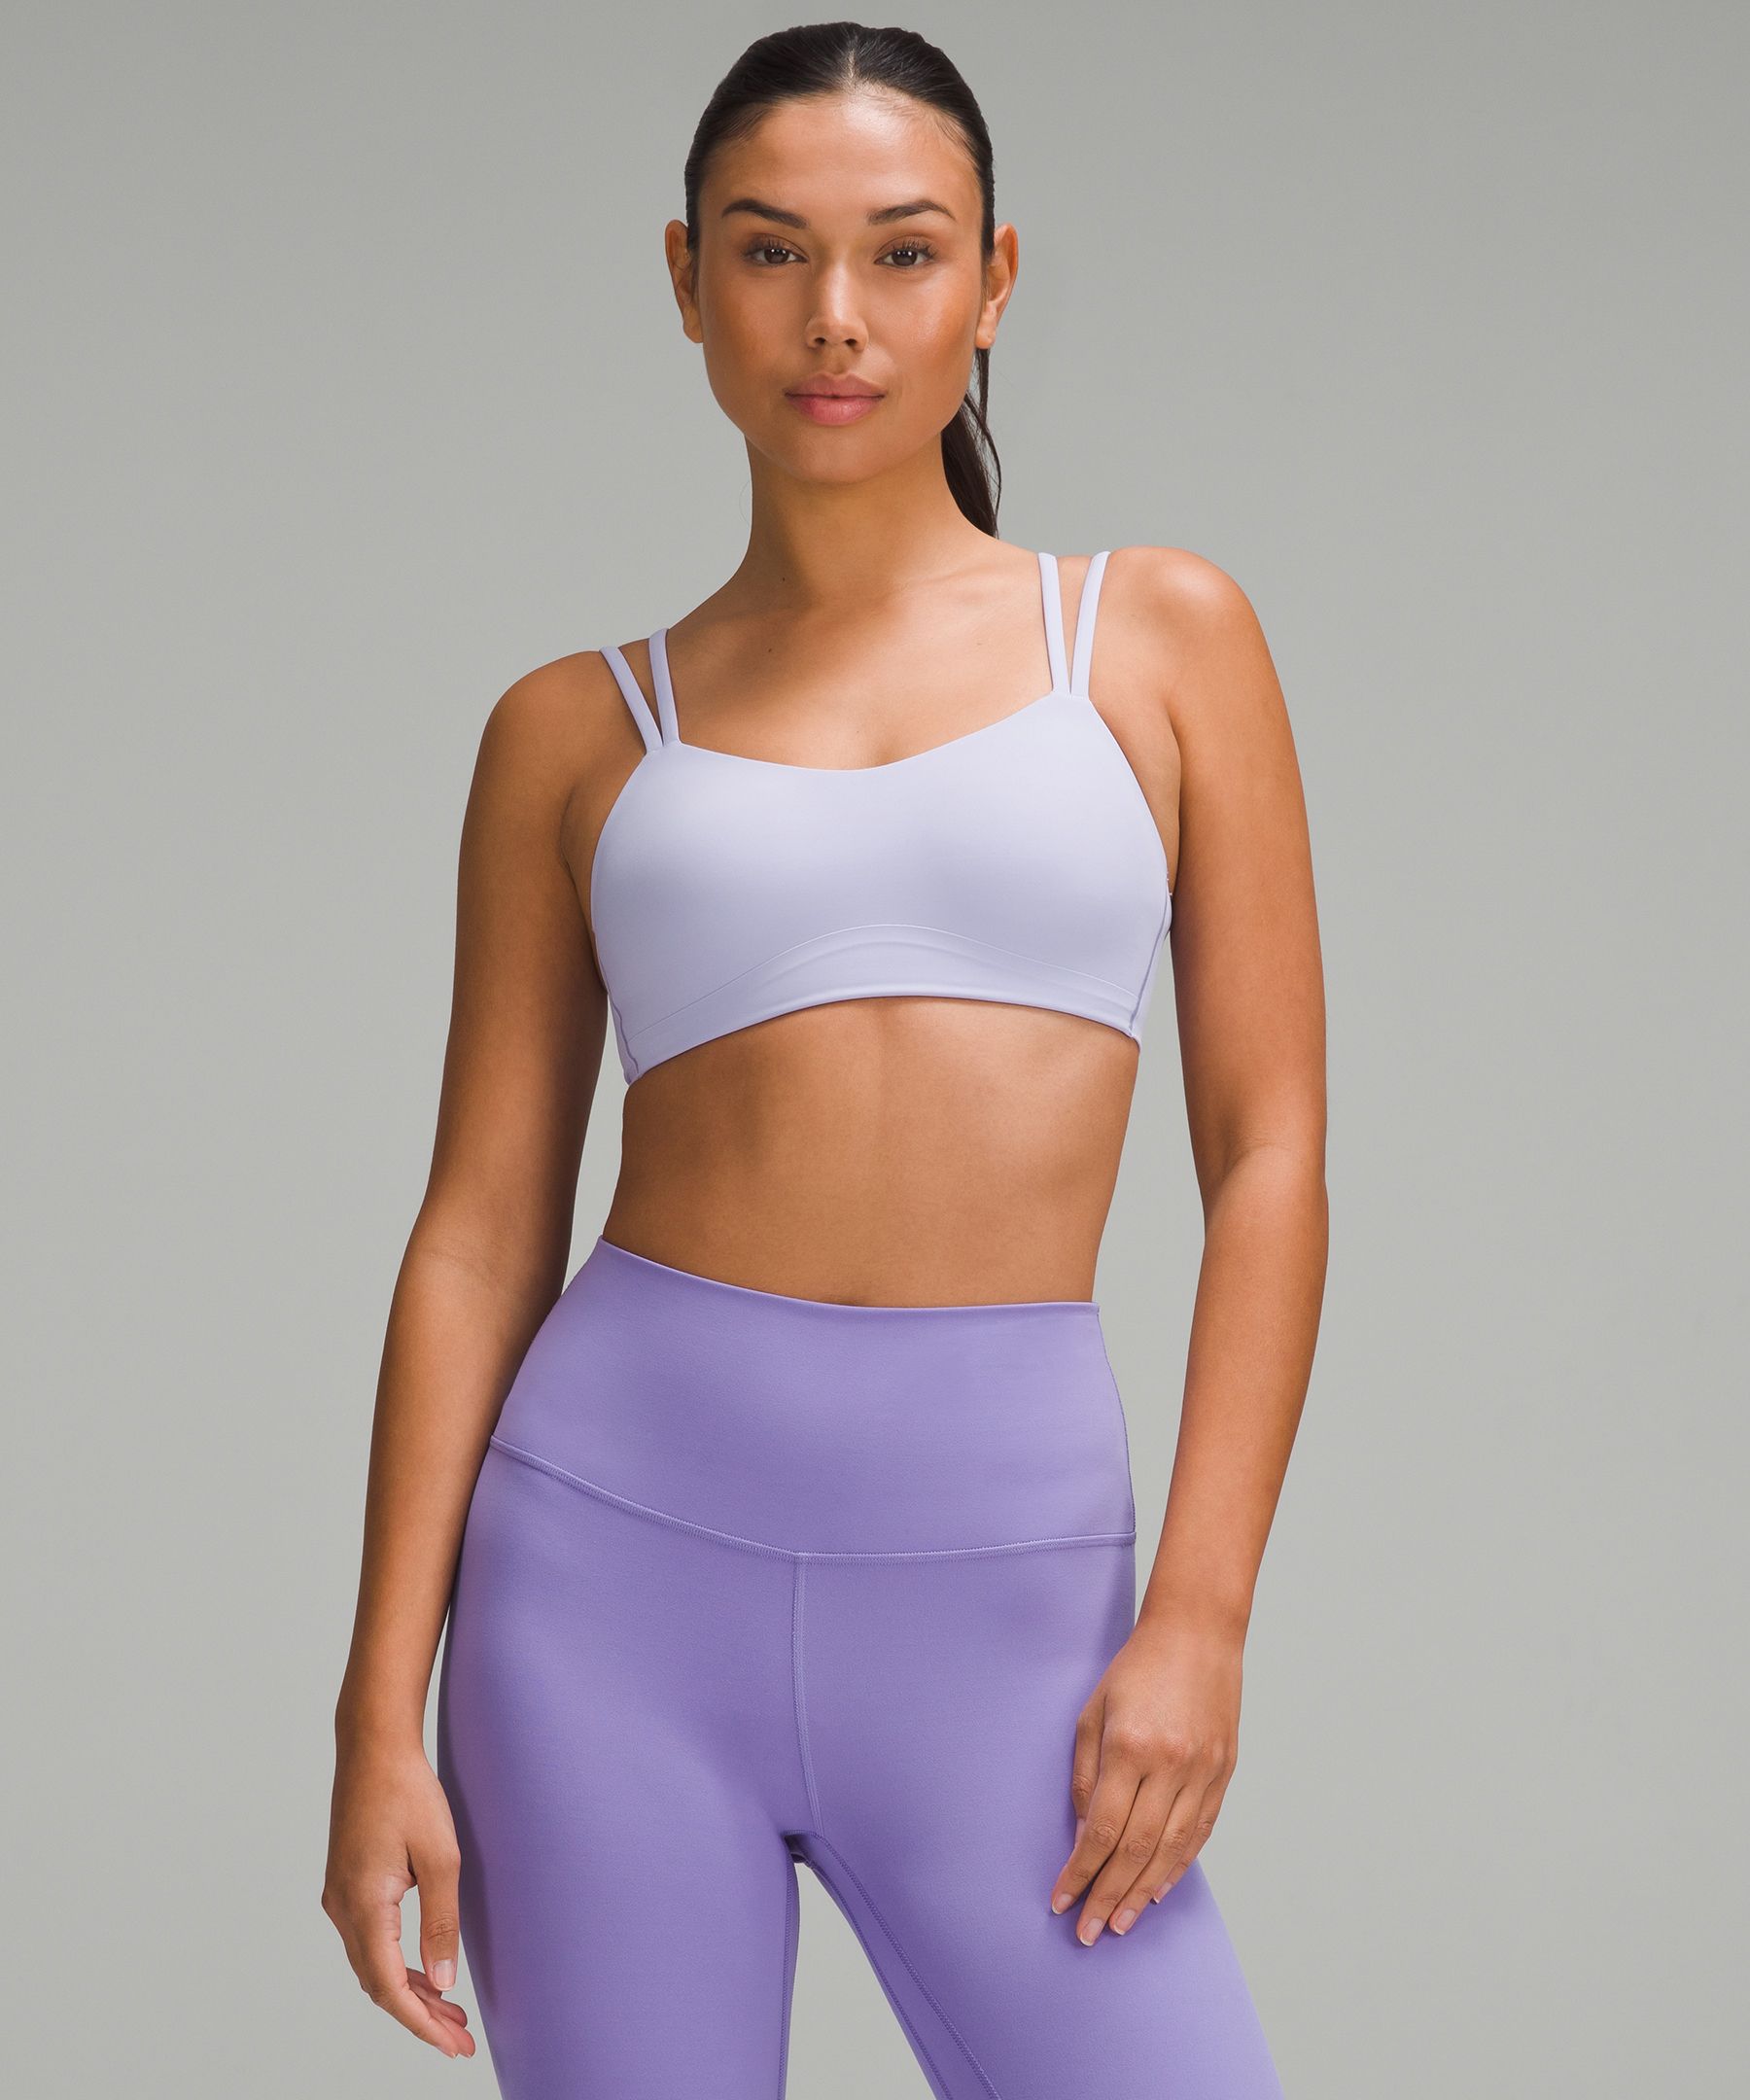 lululemon athletica, Other, I Am Selling Like A Cloud Bra Light Support  Ab Cup Brand Name Is Lululemon